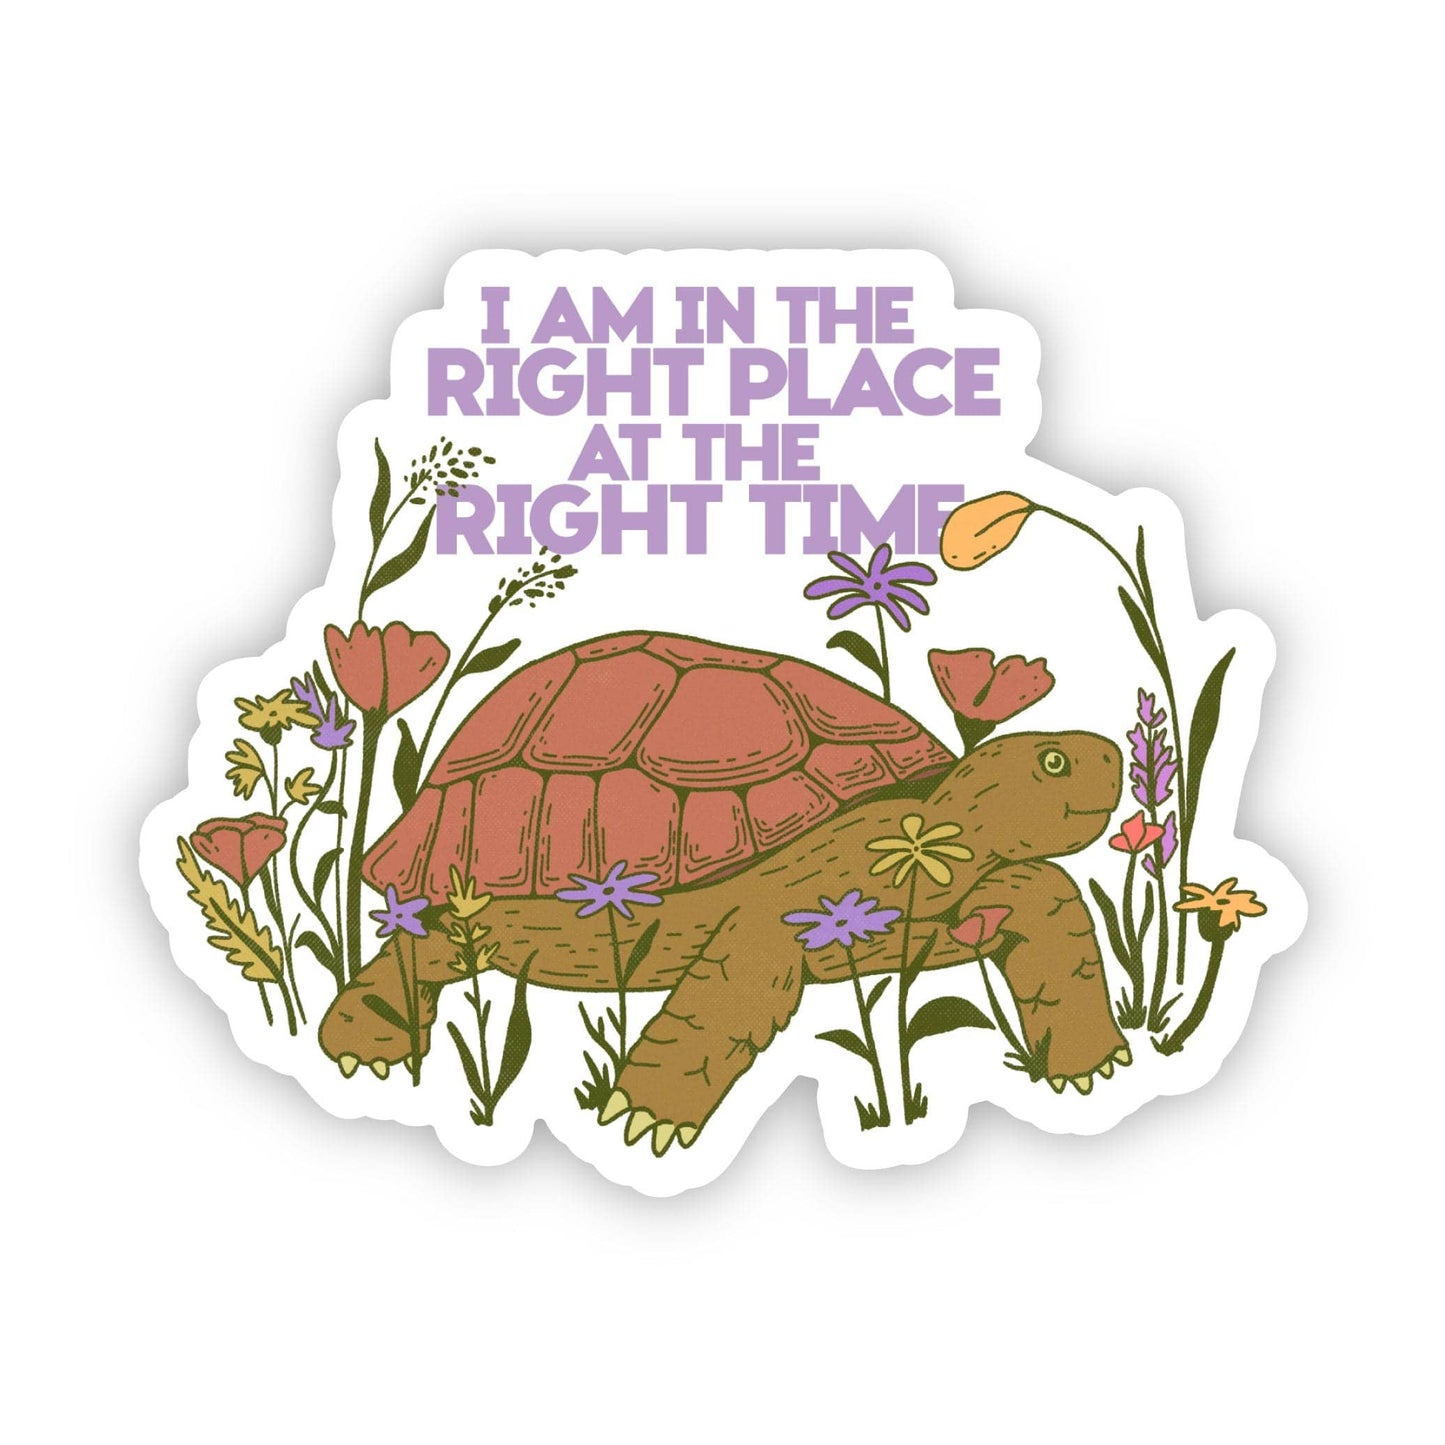 "I am in the right place at the right time" turtle sticker